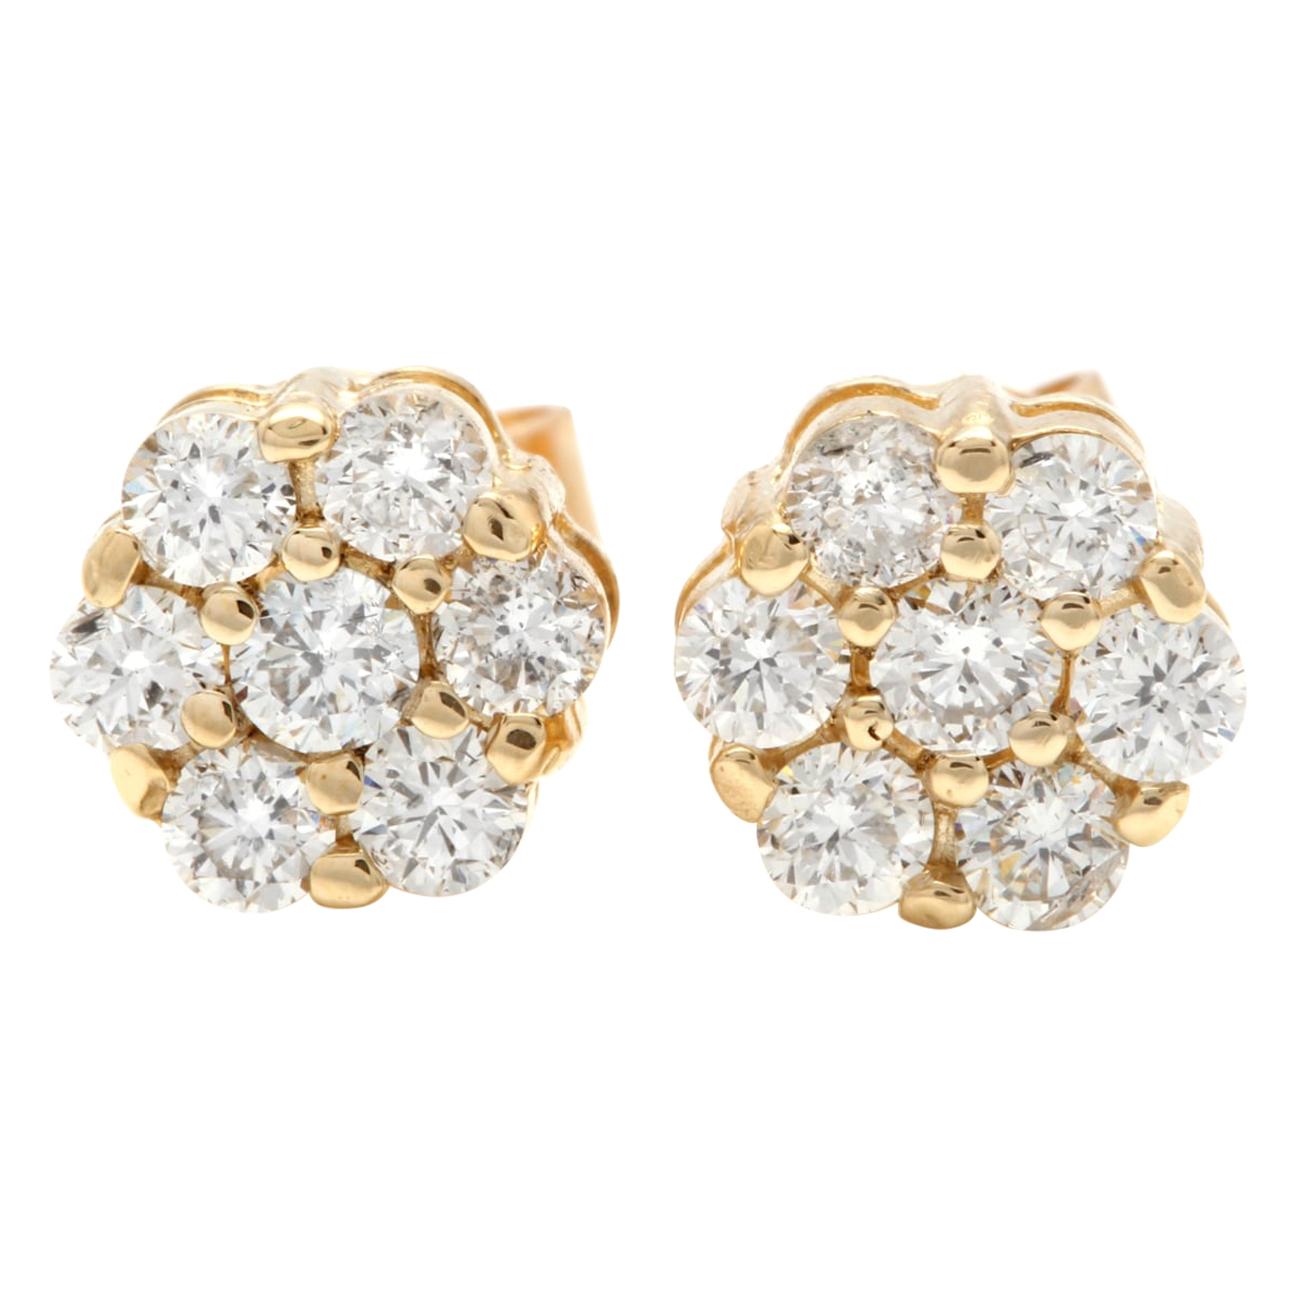 Exquisite 0.90 Carat Natural Diamond 14 Karat Solid Yellow Gold Stud Earrings For Sale